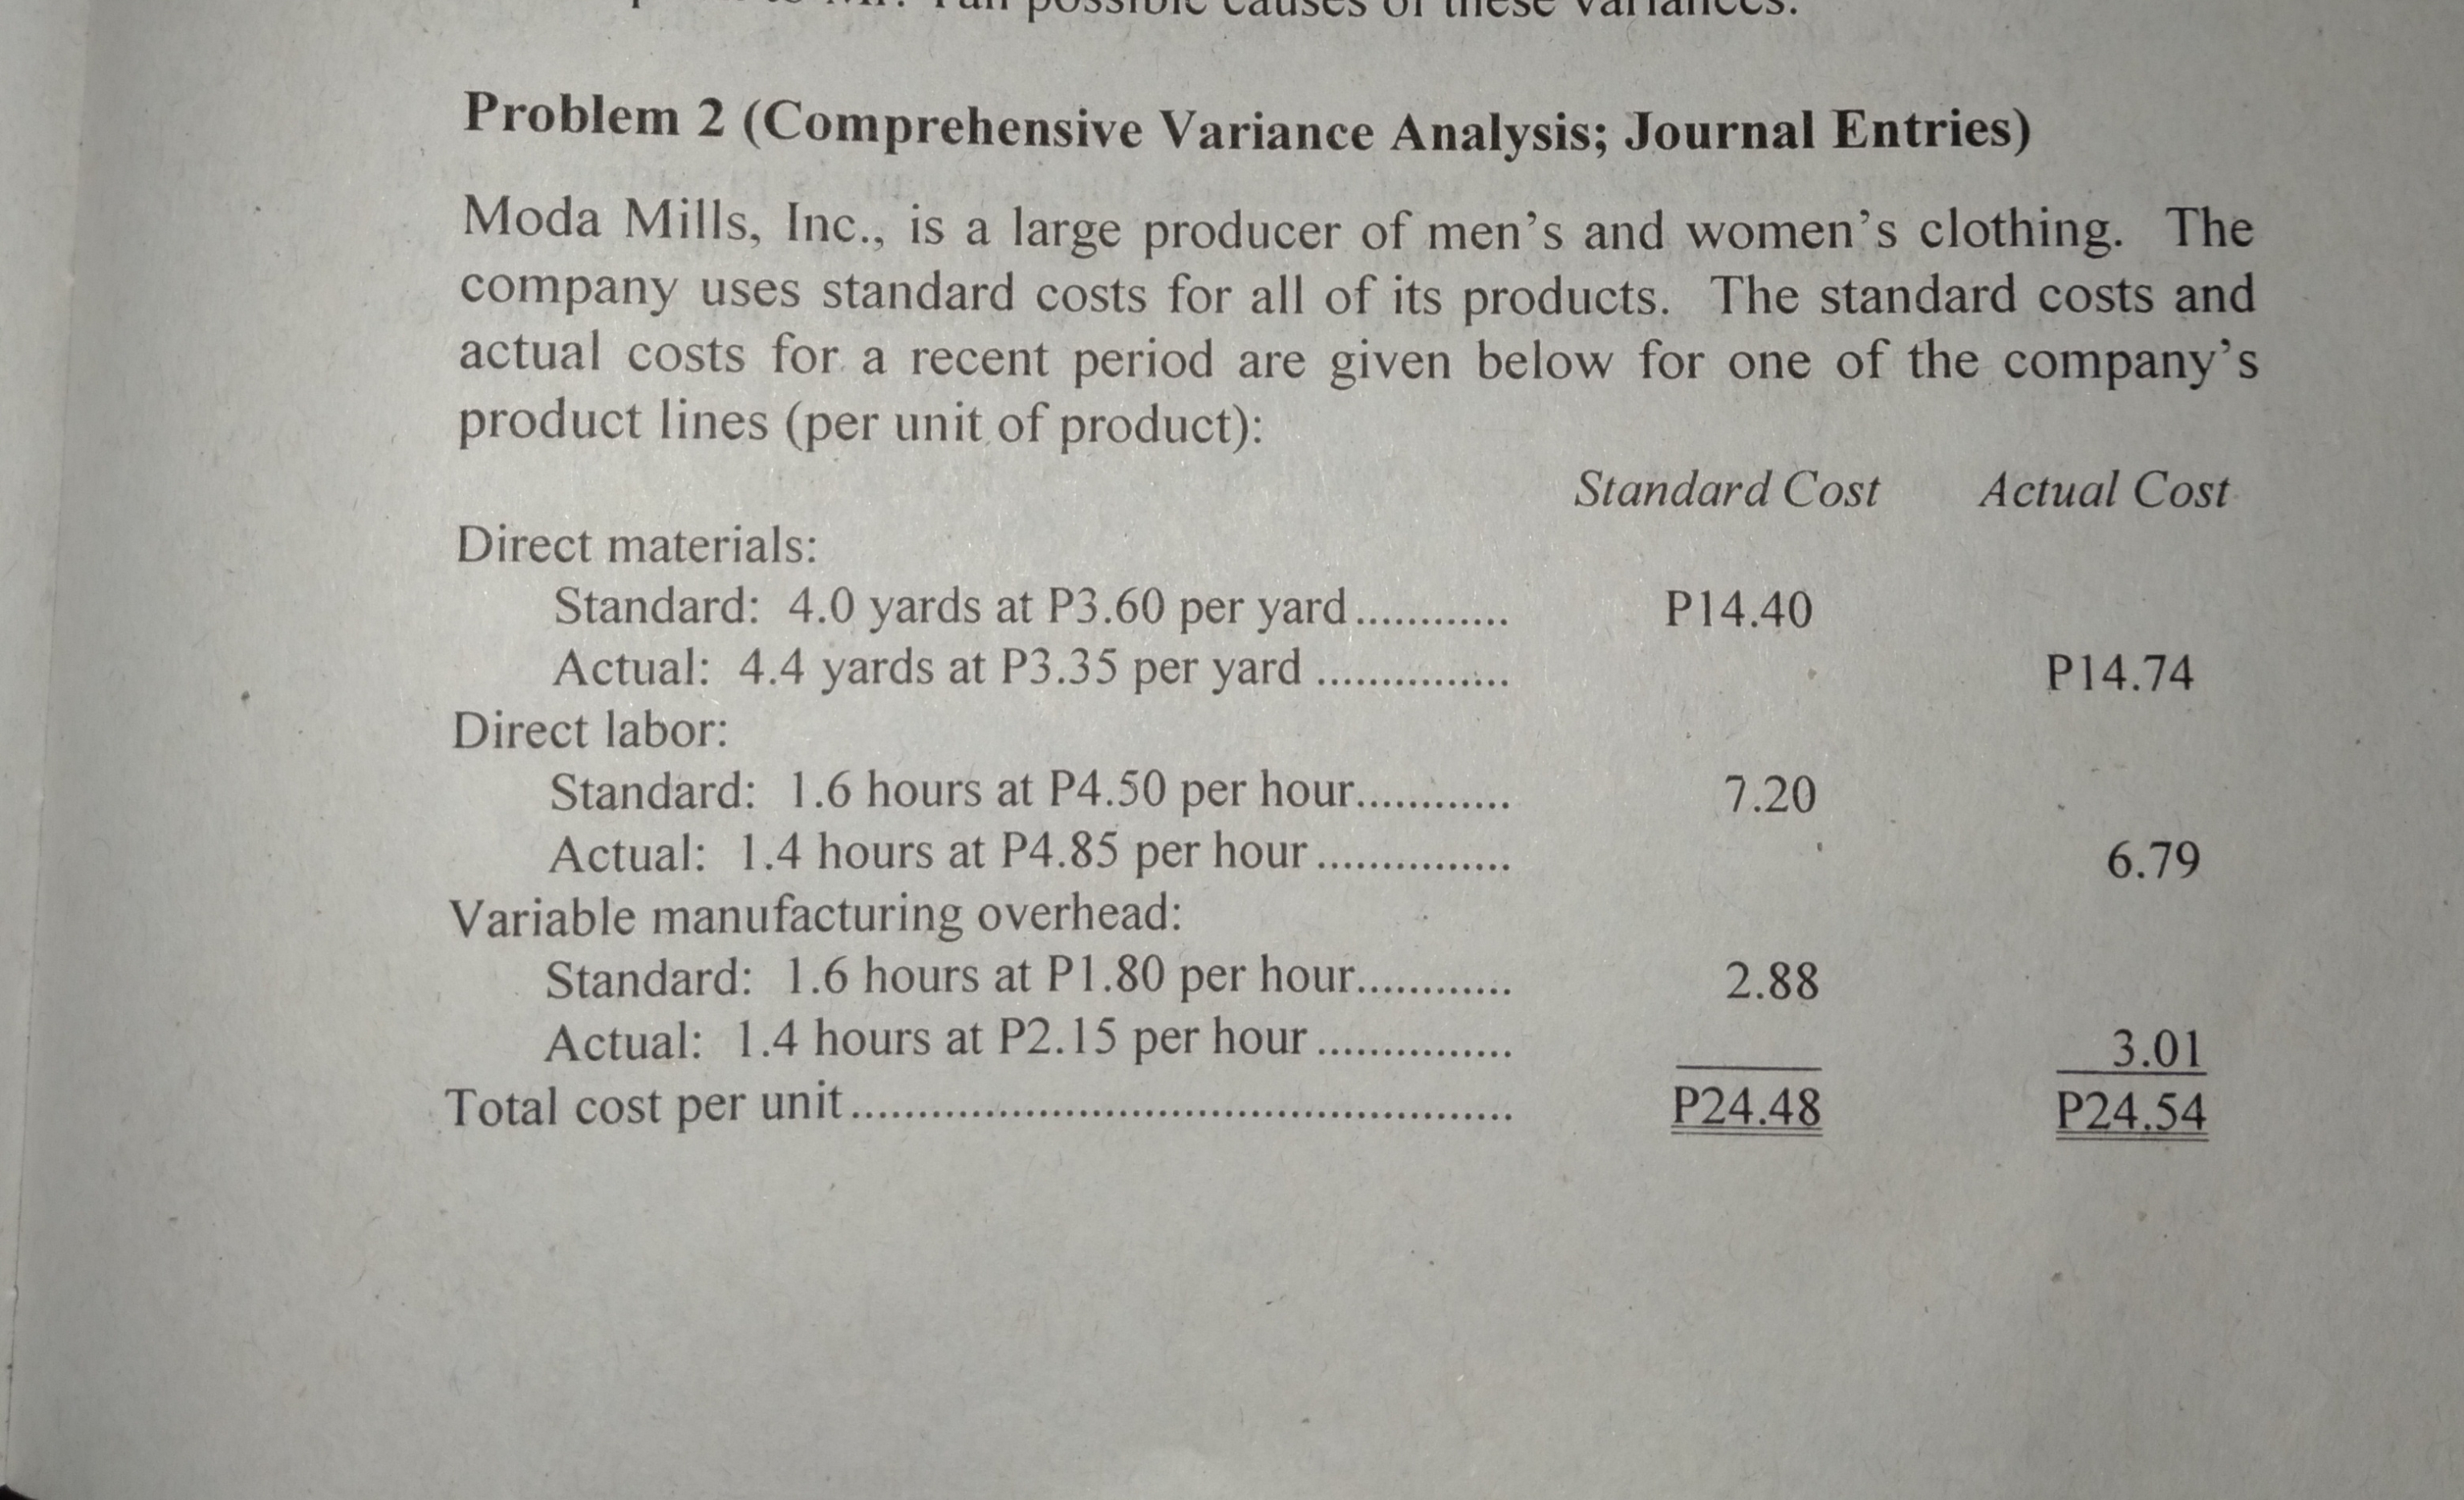 Problem 2 (Comprehensive Variance Analysis; Journal Entries)
Moda Mills, Inc., is a large producer of men's and women's clothing. The
company uses standard costs for all of its products. The standard costs and
actual costs for a recent period are given below for one of the company's
product lines (per unit of product):
Standard Cost
Actual Cost
Direct materials:
Standard: 4.0 yards at P3.60 per yard...
Actual: 4.4 yards at P3..35 per yard...
P14.40
P14.74
Direct labor:
Standard: 1.6 hours at P4.50 per hour..
Actual: 1.4 hours at P4.85 per
Variable manufacturing overhead:
Standard: 1.6 hours at P1.80 per hour.....
Actual: 1.4 hours at P2.15 per
Total cost per unit......
7.20
hour..
6.79
2.88
hour ..
3.01
P24.54
P24.48
